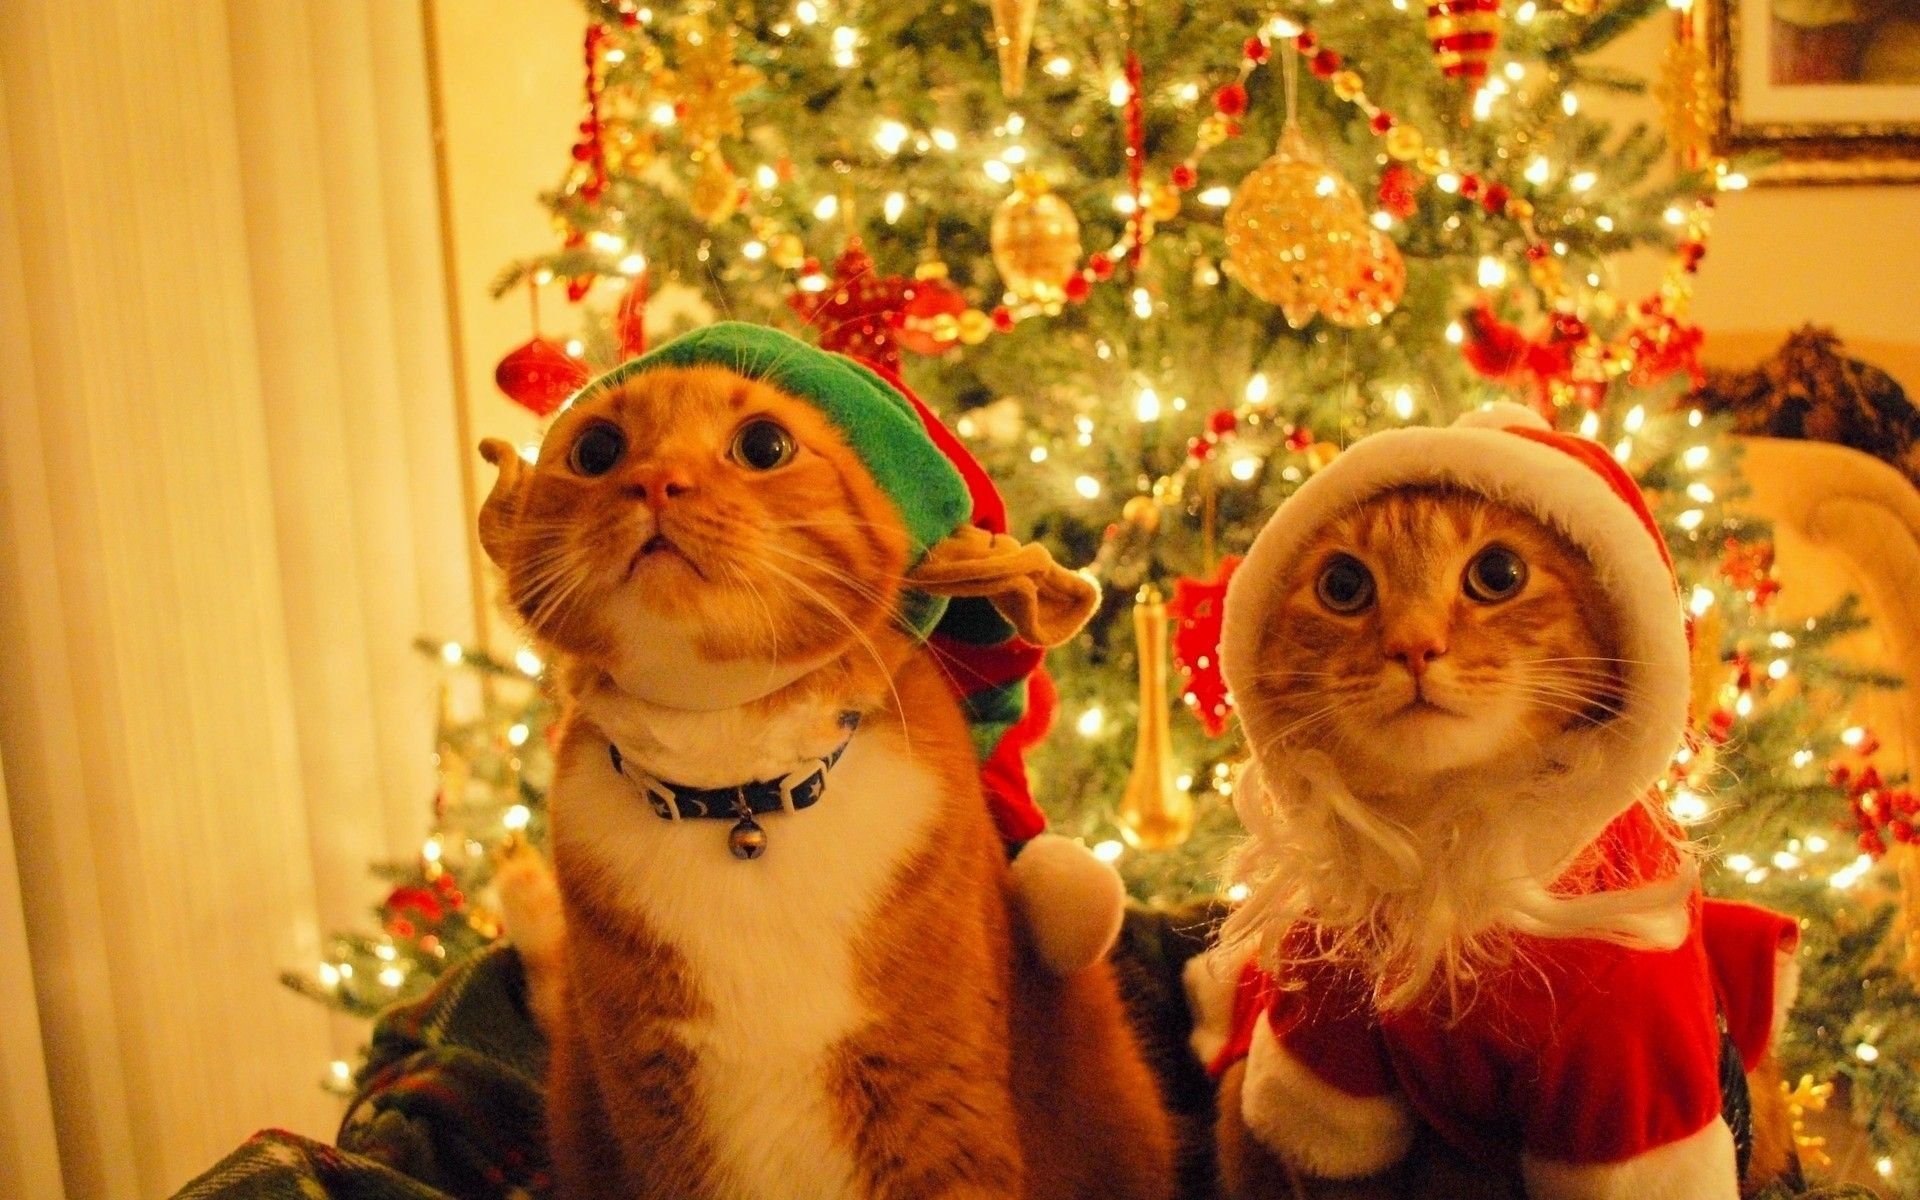 Two Cats Merry Christmas Wallpaper Free Downlo #10642 Wallpaper ...